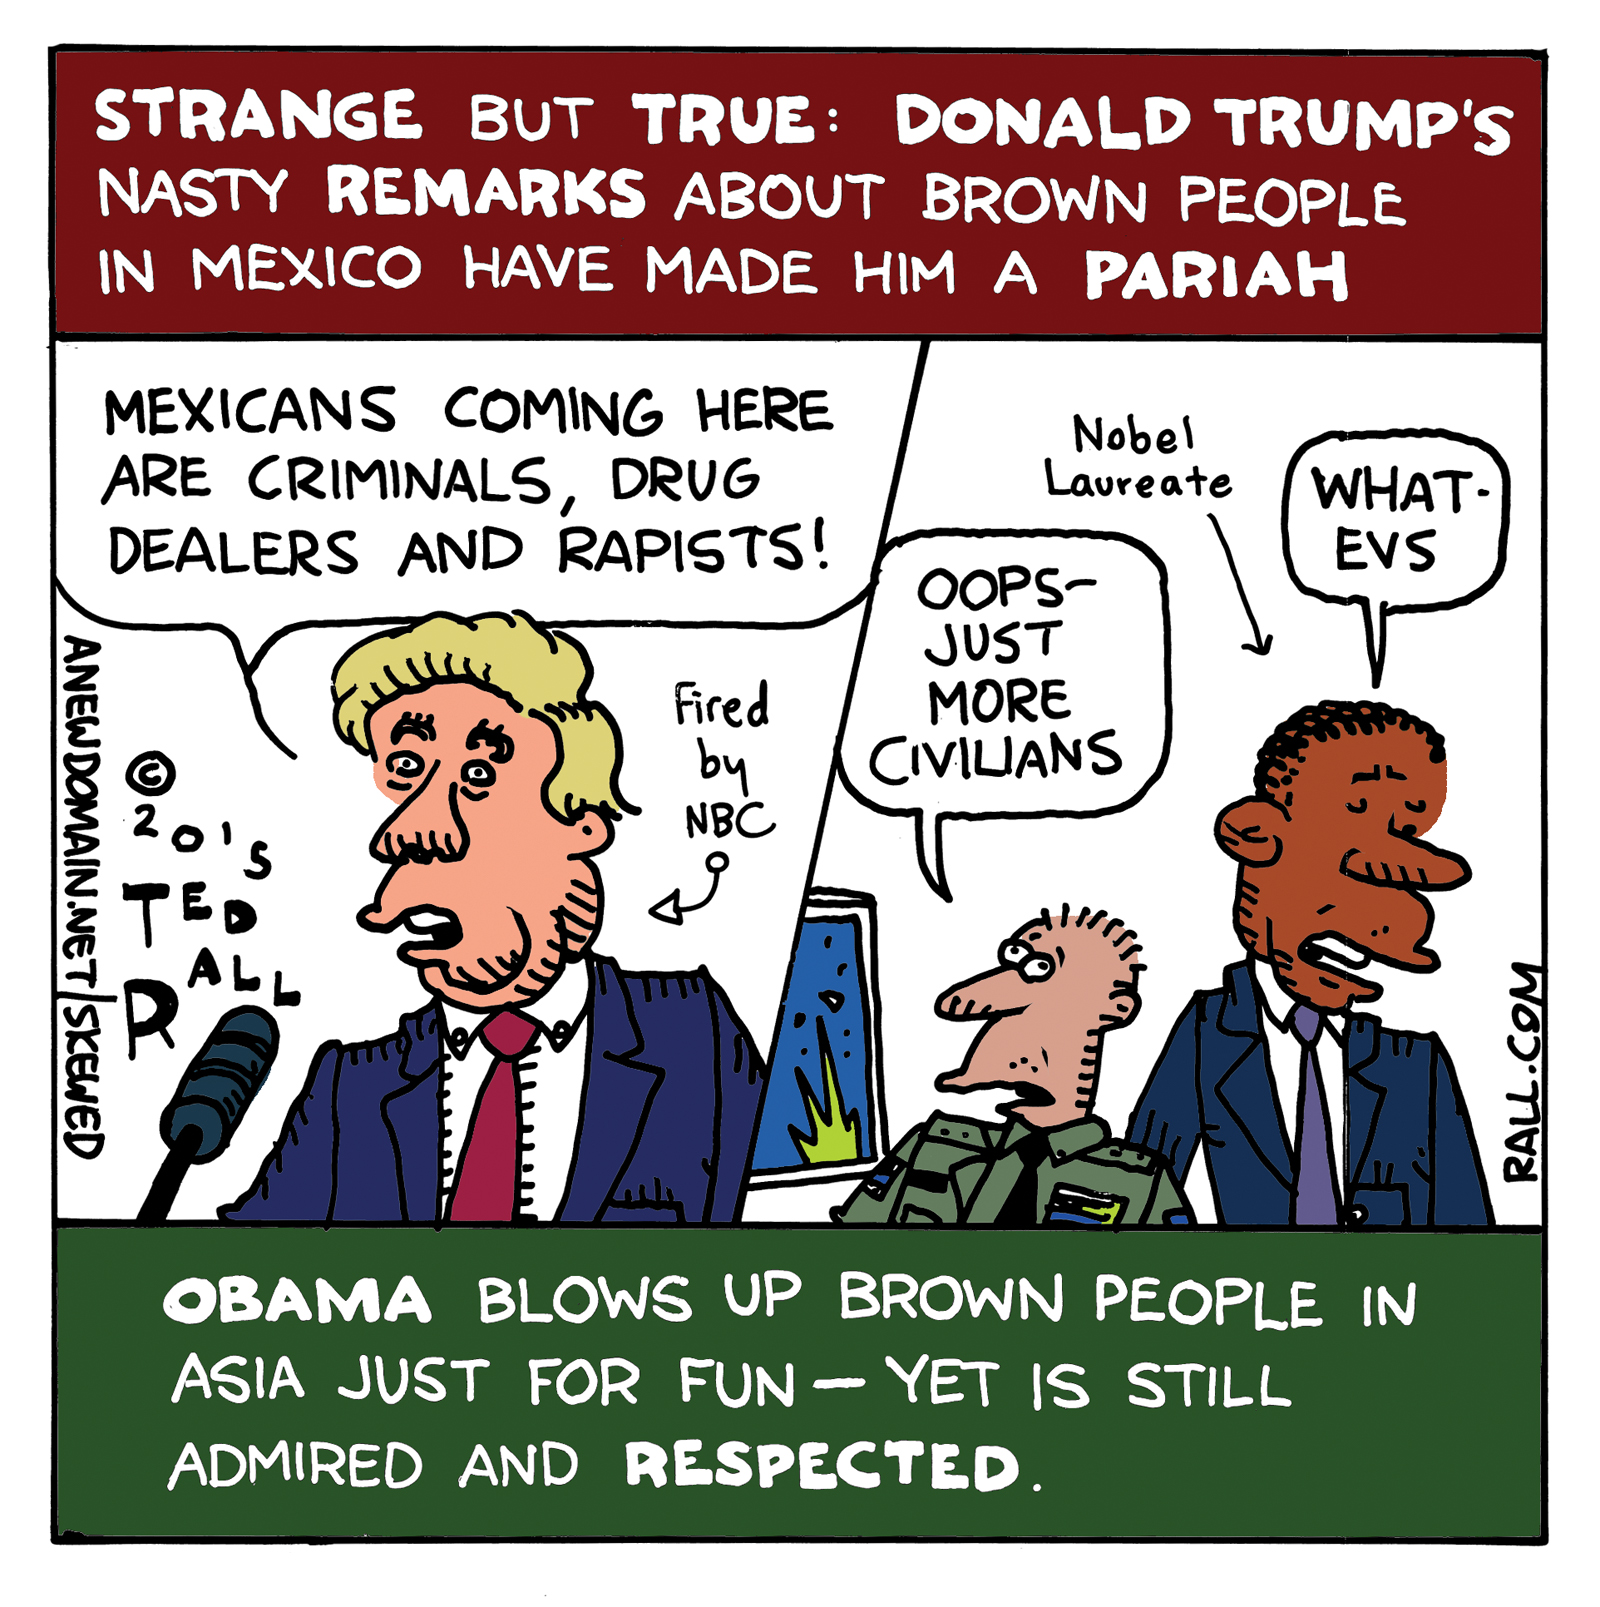 Strange but true: Donald Trump, the political clown, real estate mogul and presidential candidate, is being pilloried and losing business for racist remarks about Mexican people. However, Obama murders innocent people every day, yet no one cares. Words obviously matter more than lives.